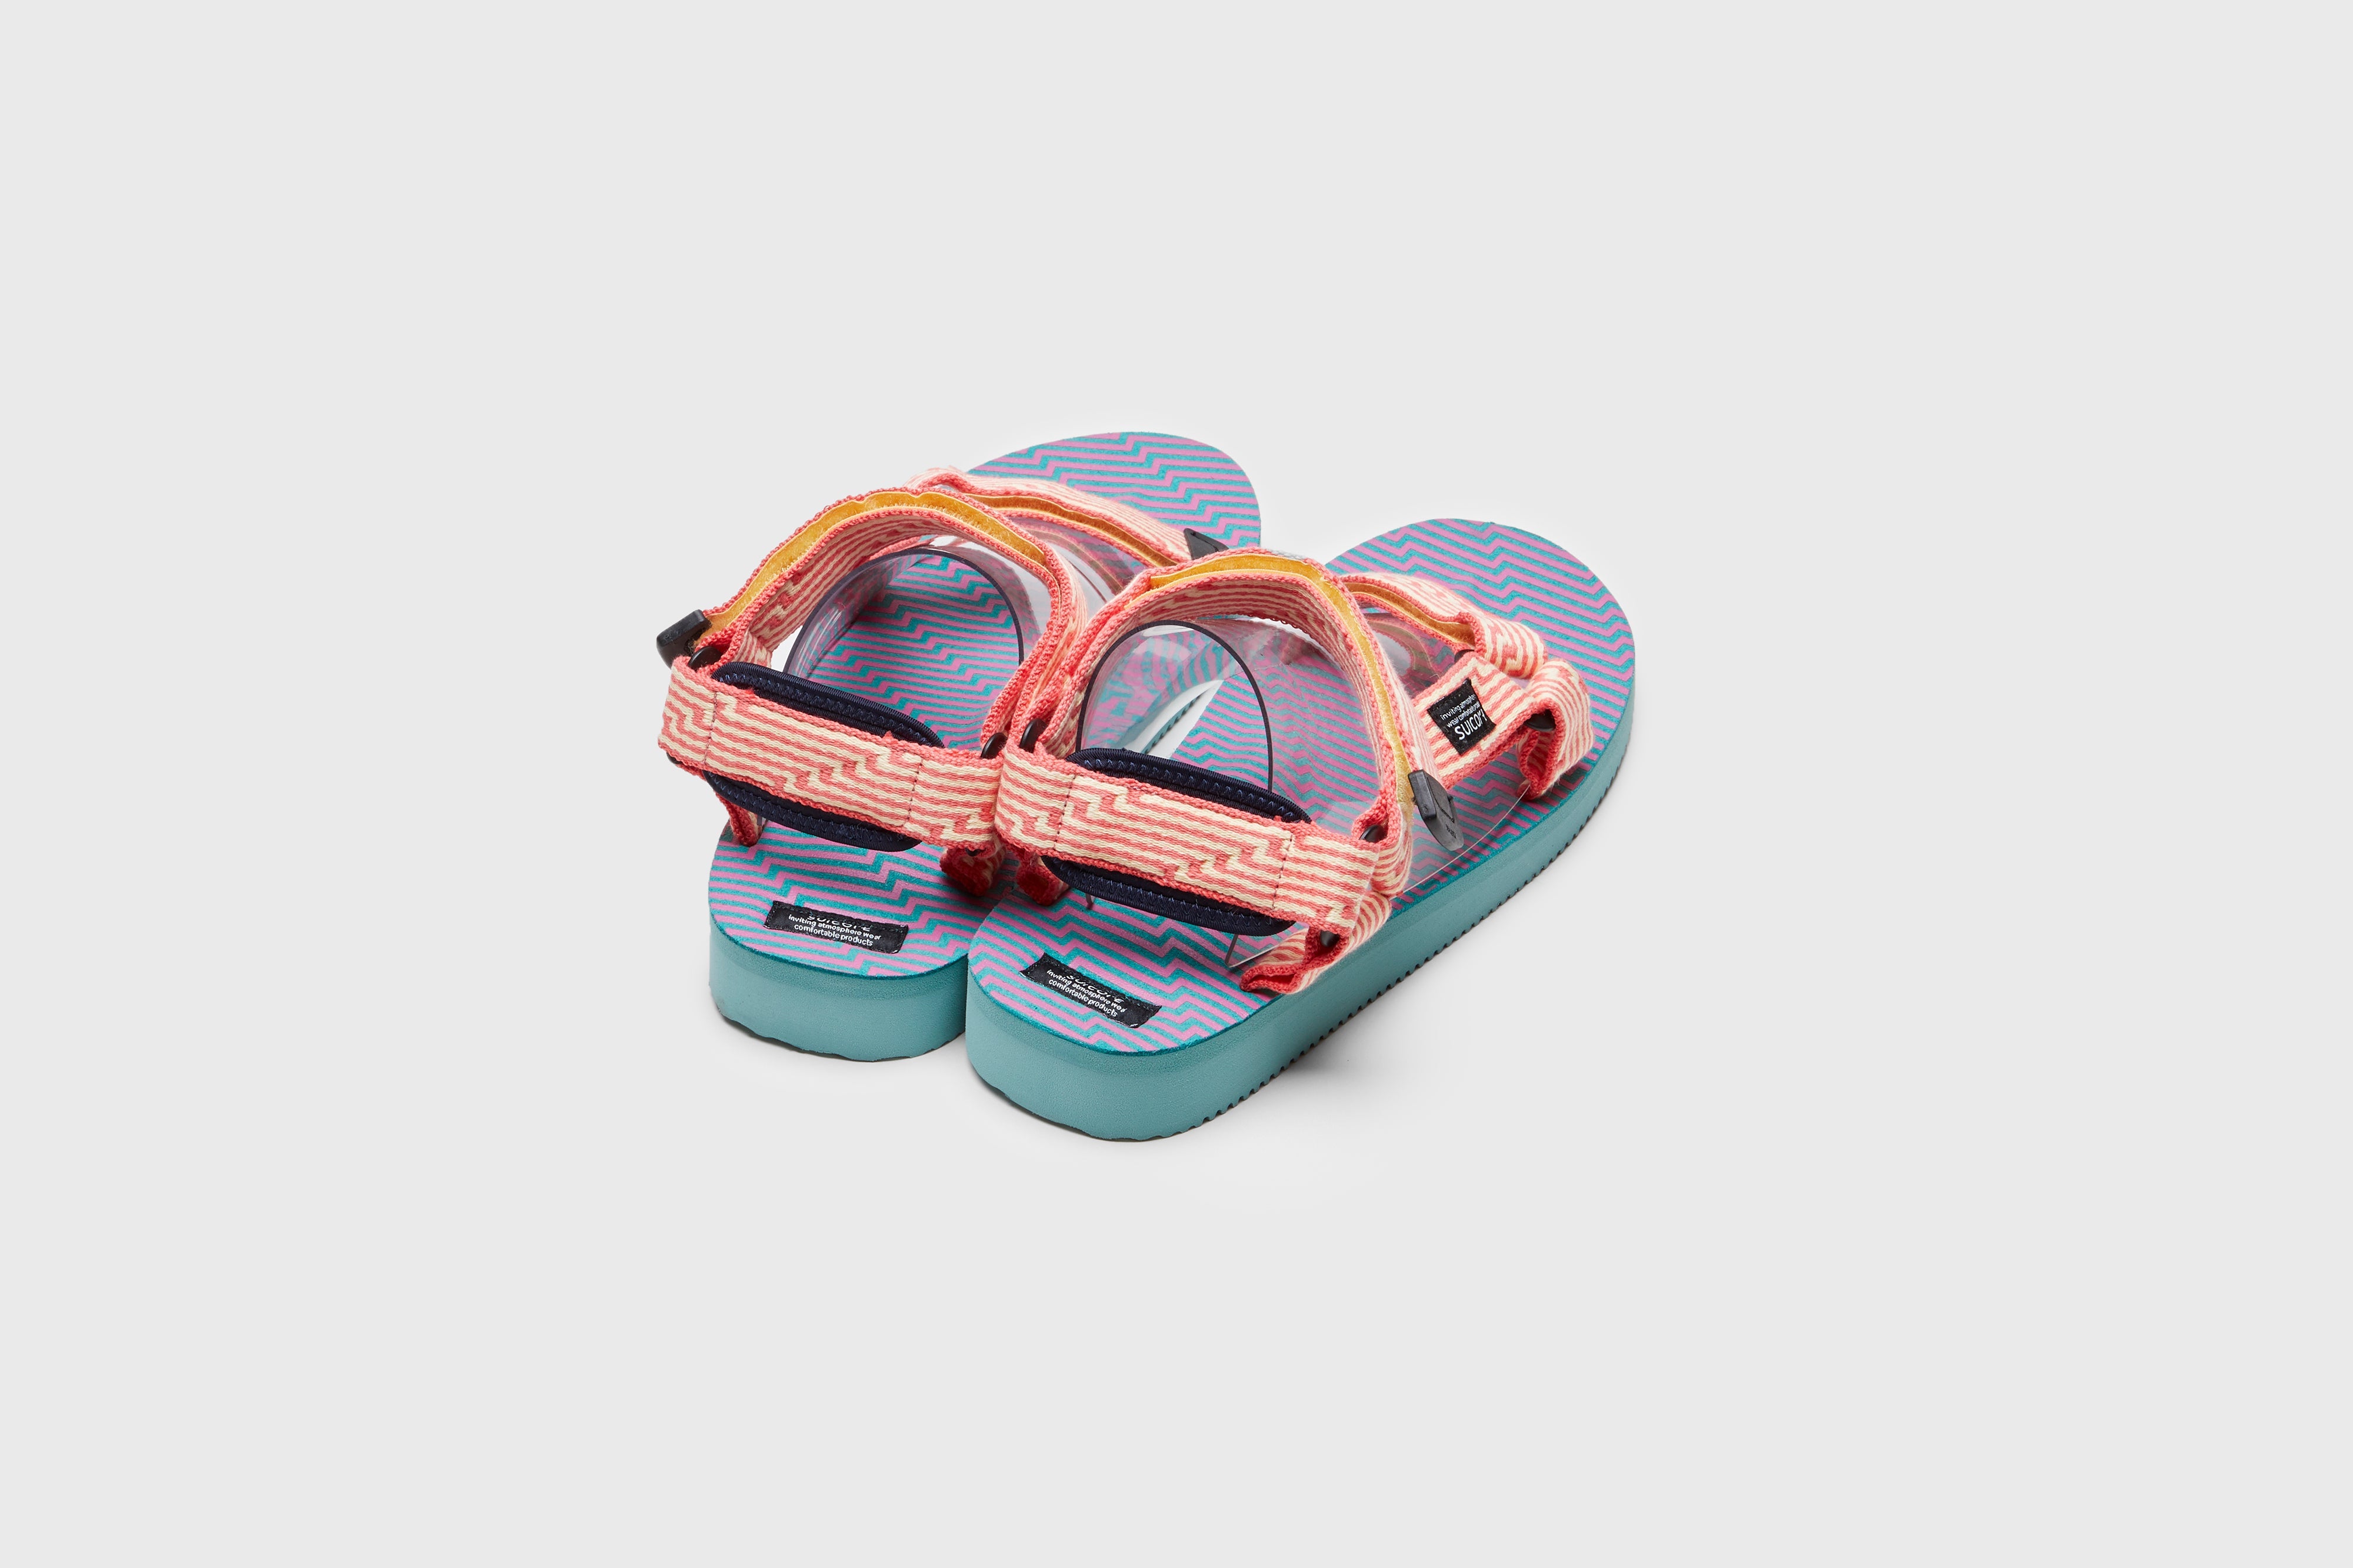 SUICOKE DEPA-JC01 sandals with yellow &amp; pink nylon upper, yellow &amp; pink midsole and sole, strap and logo patch. From Spring/Summer 2023 collection on eightywingold Web Store, an official partner of SUICOKE. OG-022-JC01 YELLOW X PINK